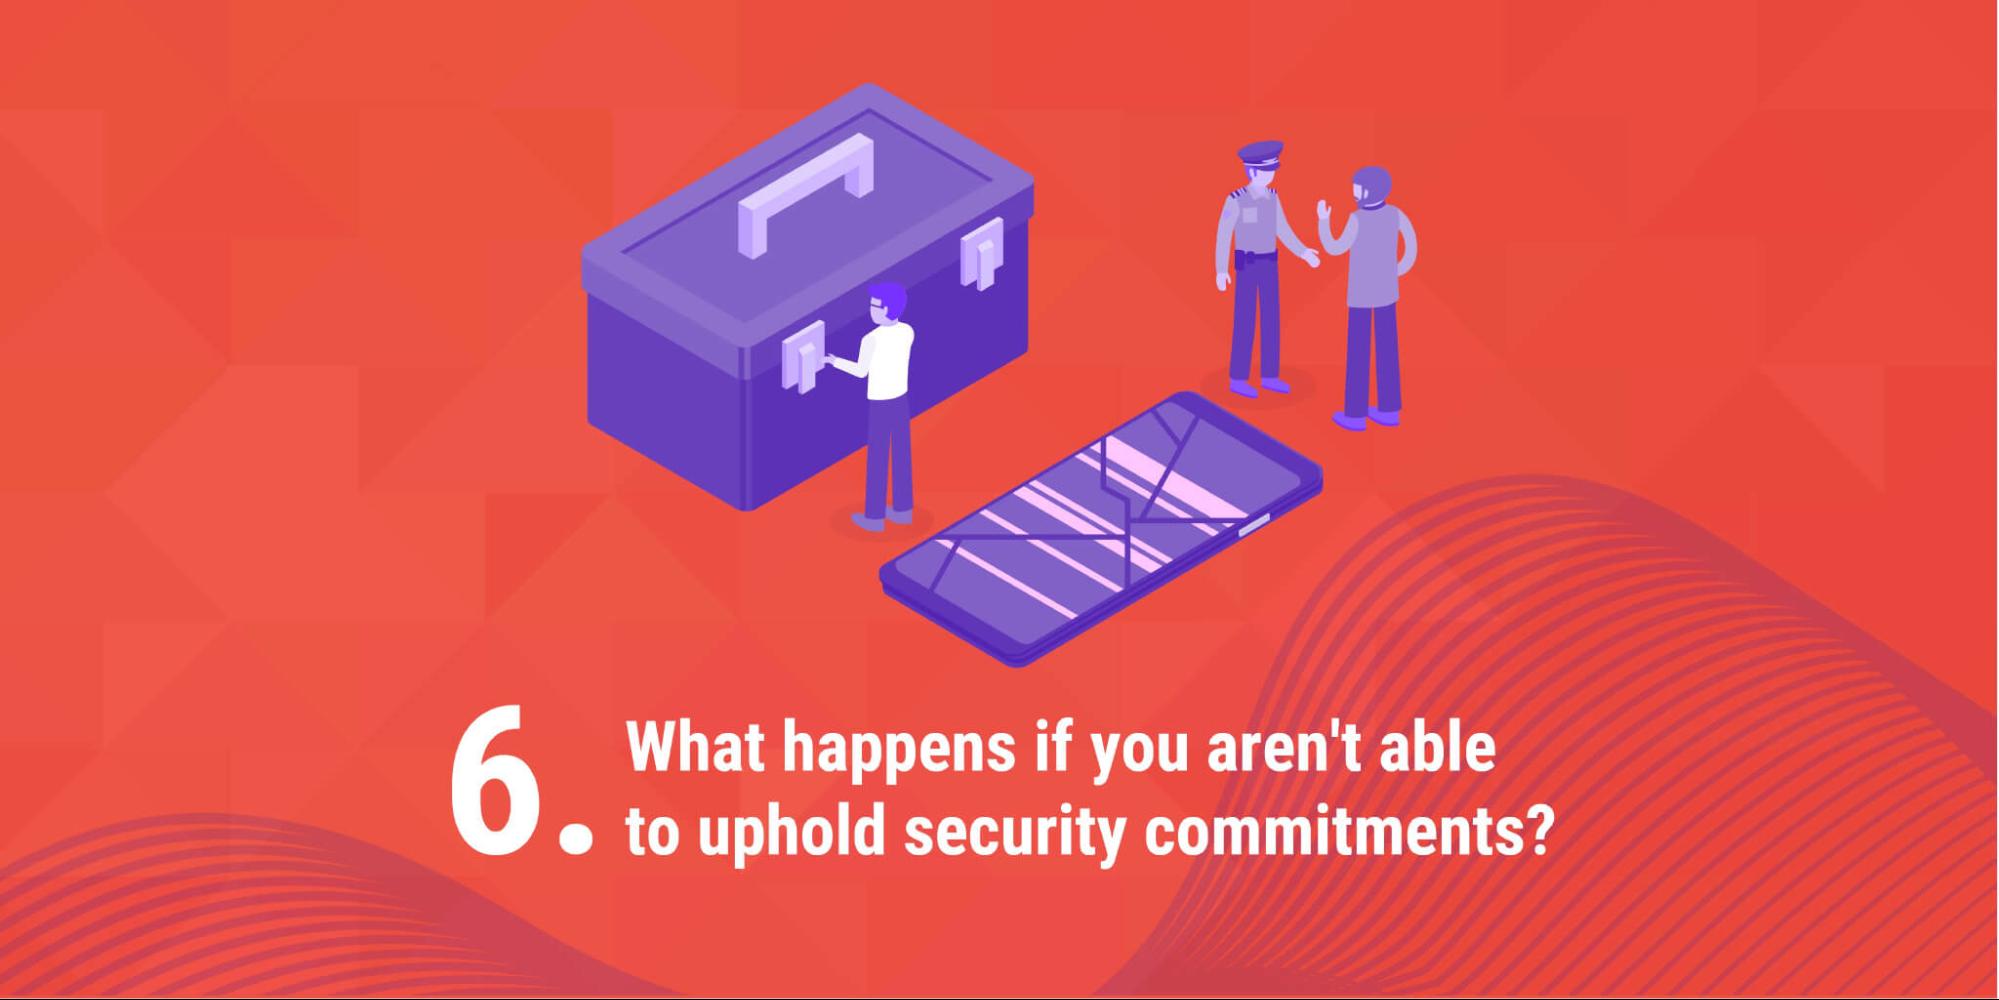 6. What happens if you aren't able to uphold security commitments?